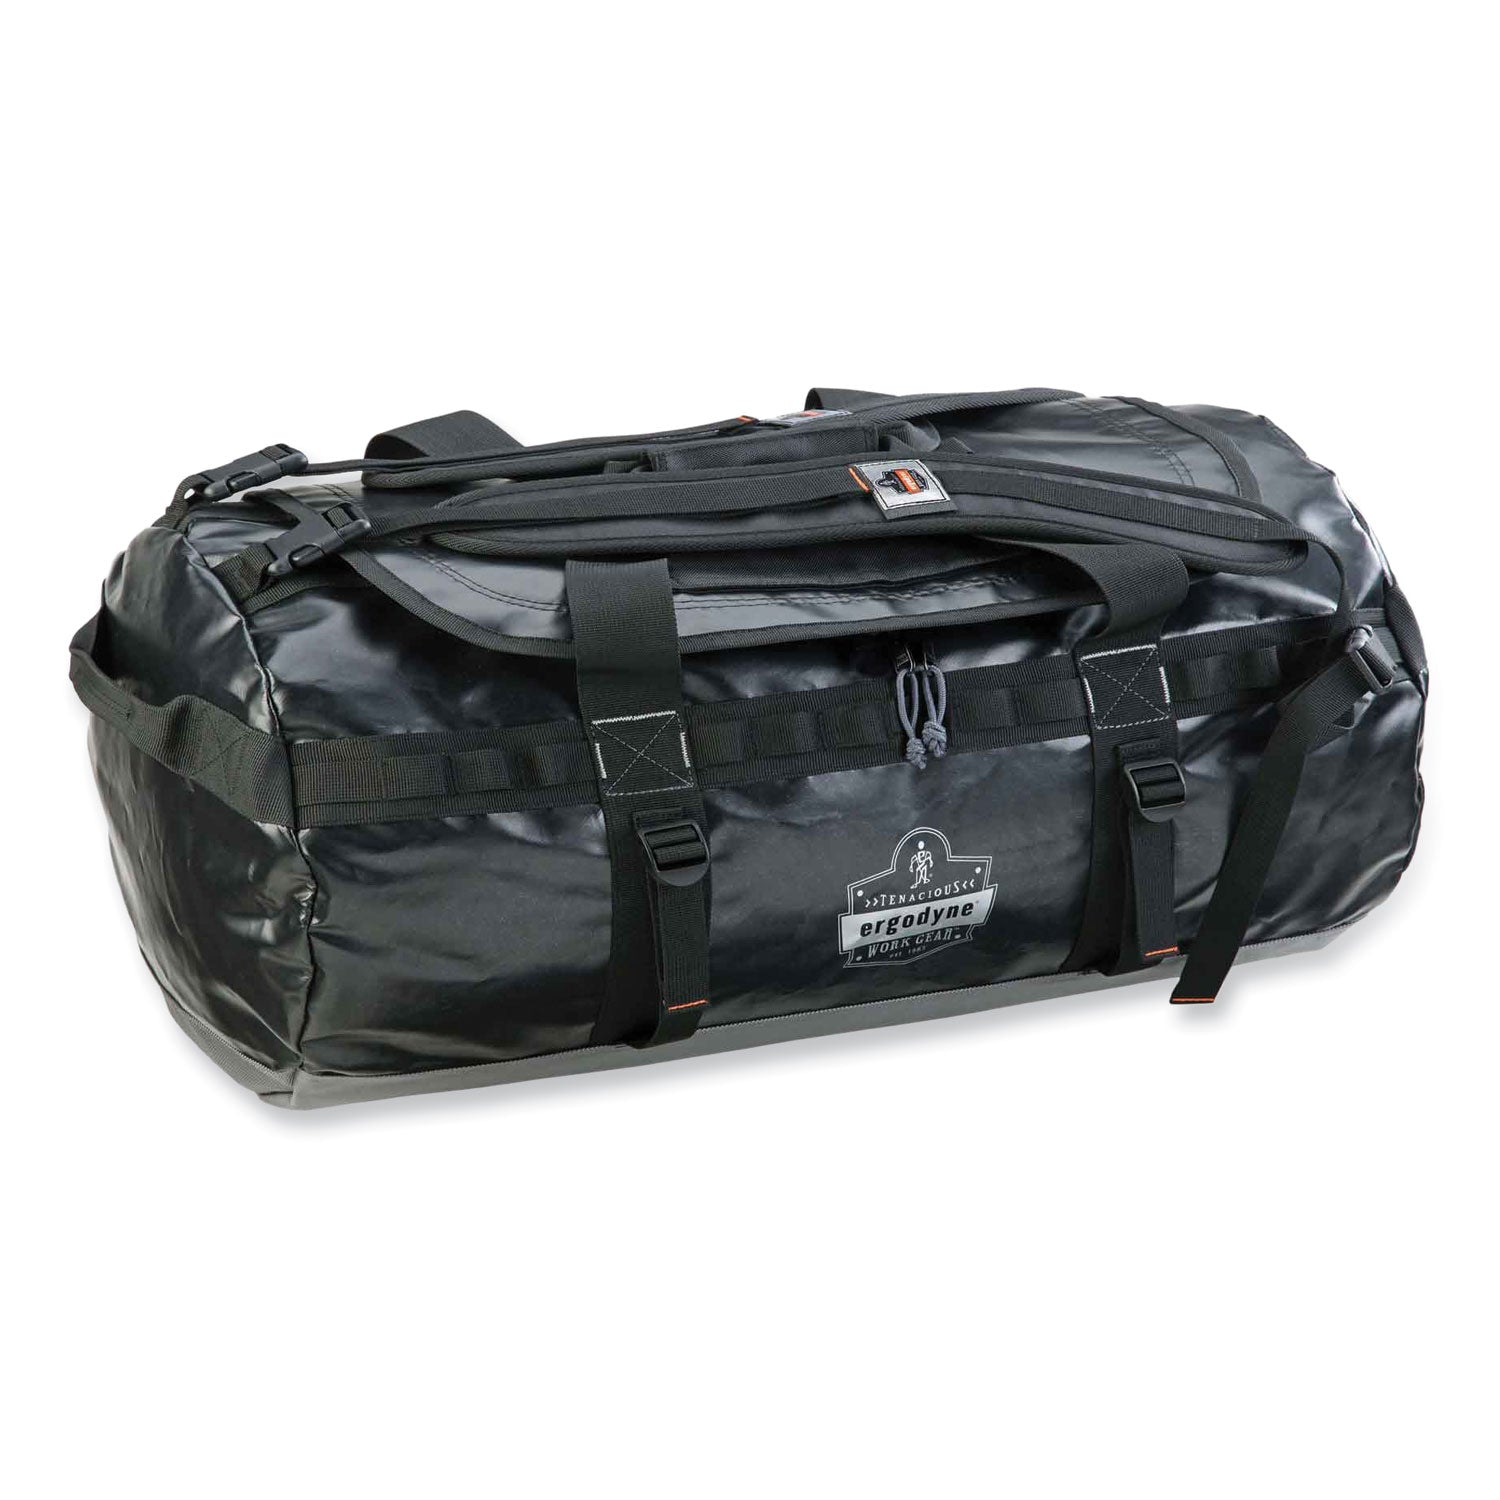 arsenal-5030-water-resistant-duffel-bag-large-185-x-31-x-185-black-ships-in-1-3-business-days_ego13034 - 2